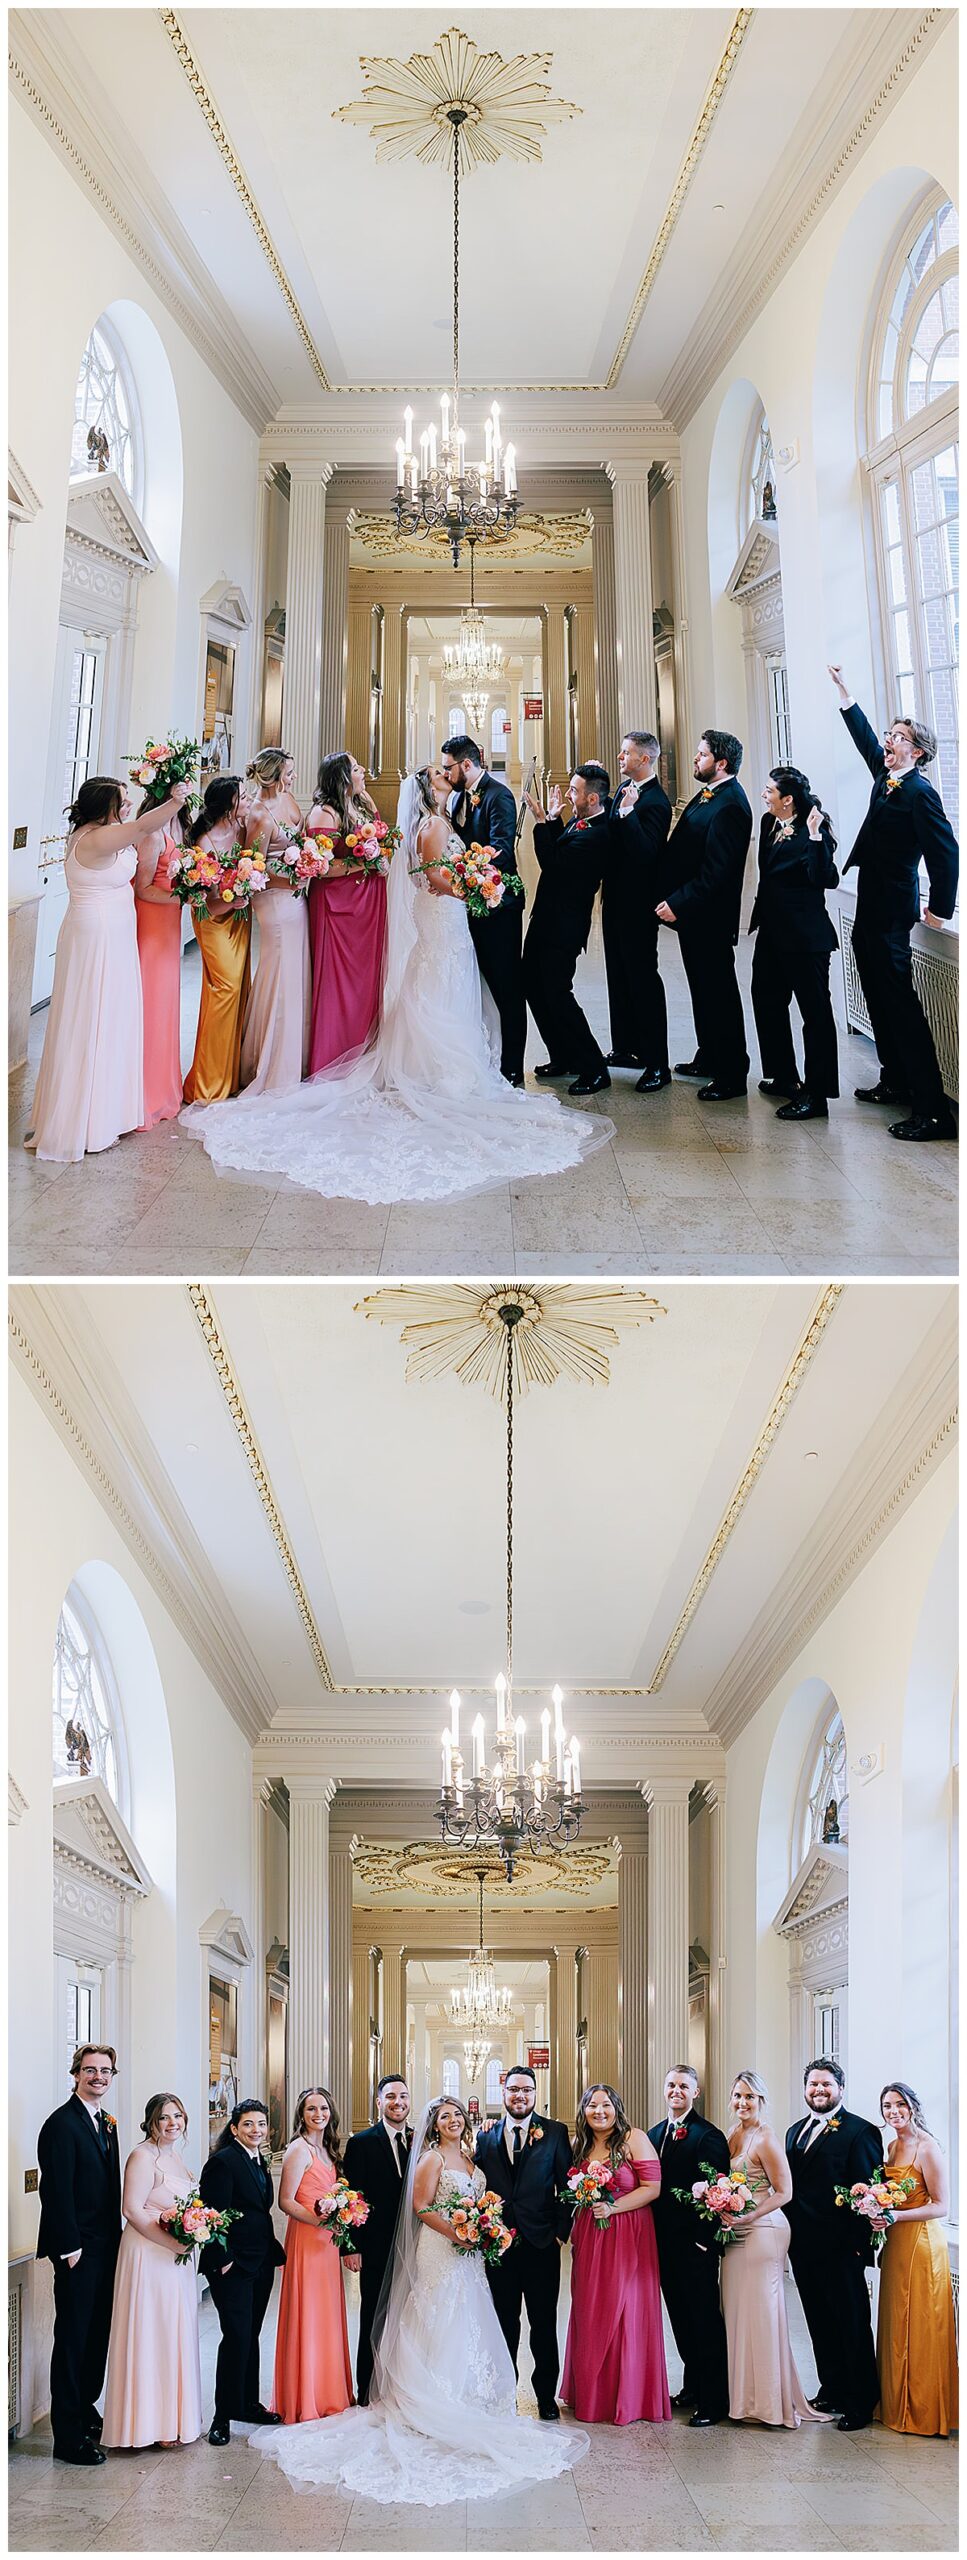 Bride and groom stand together with wedding party for Kayla Bouren Photography